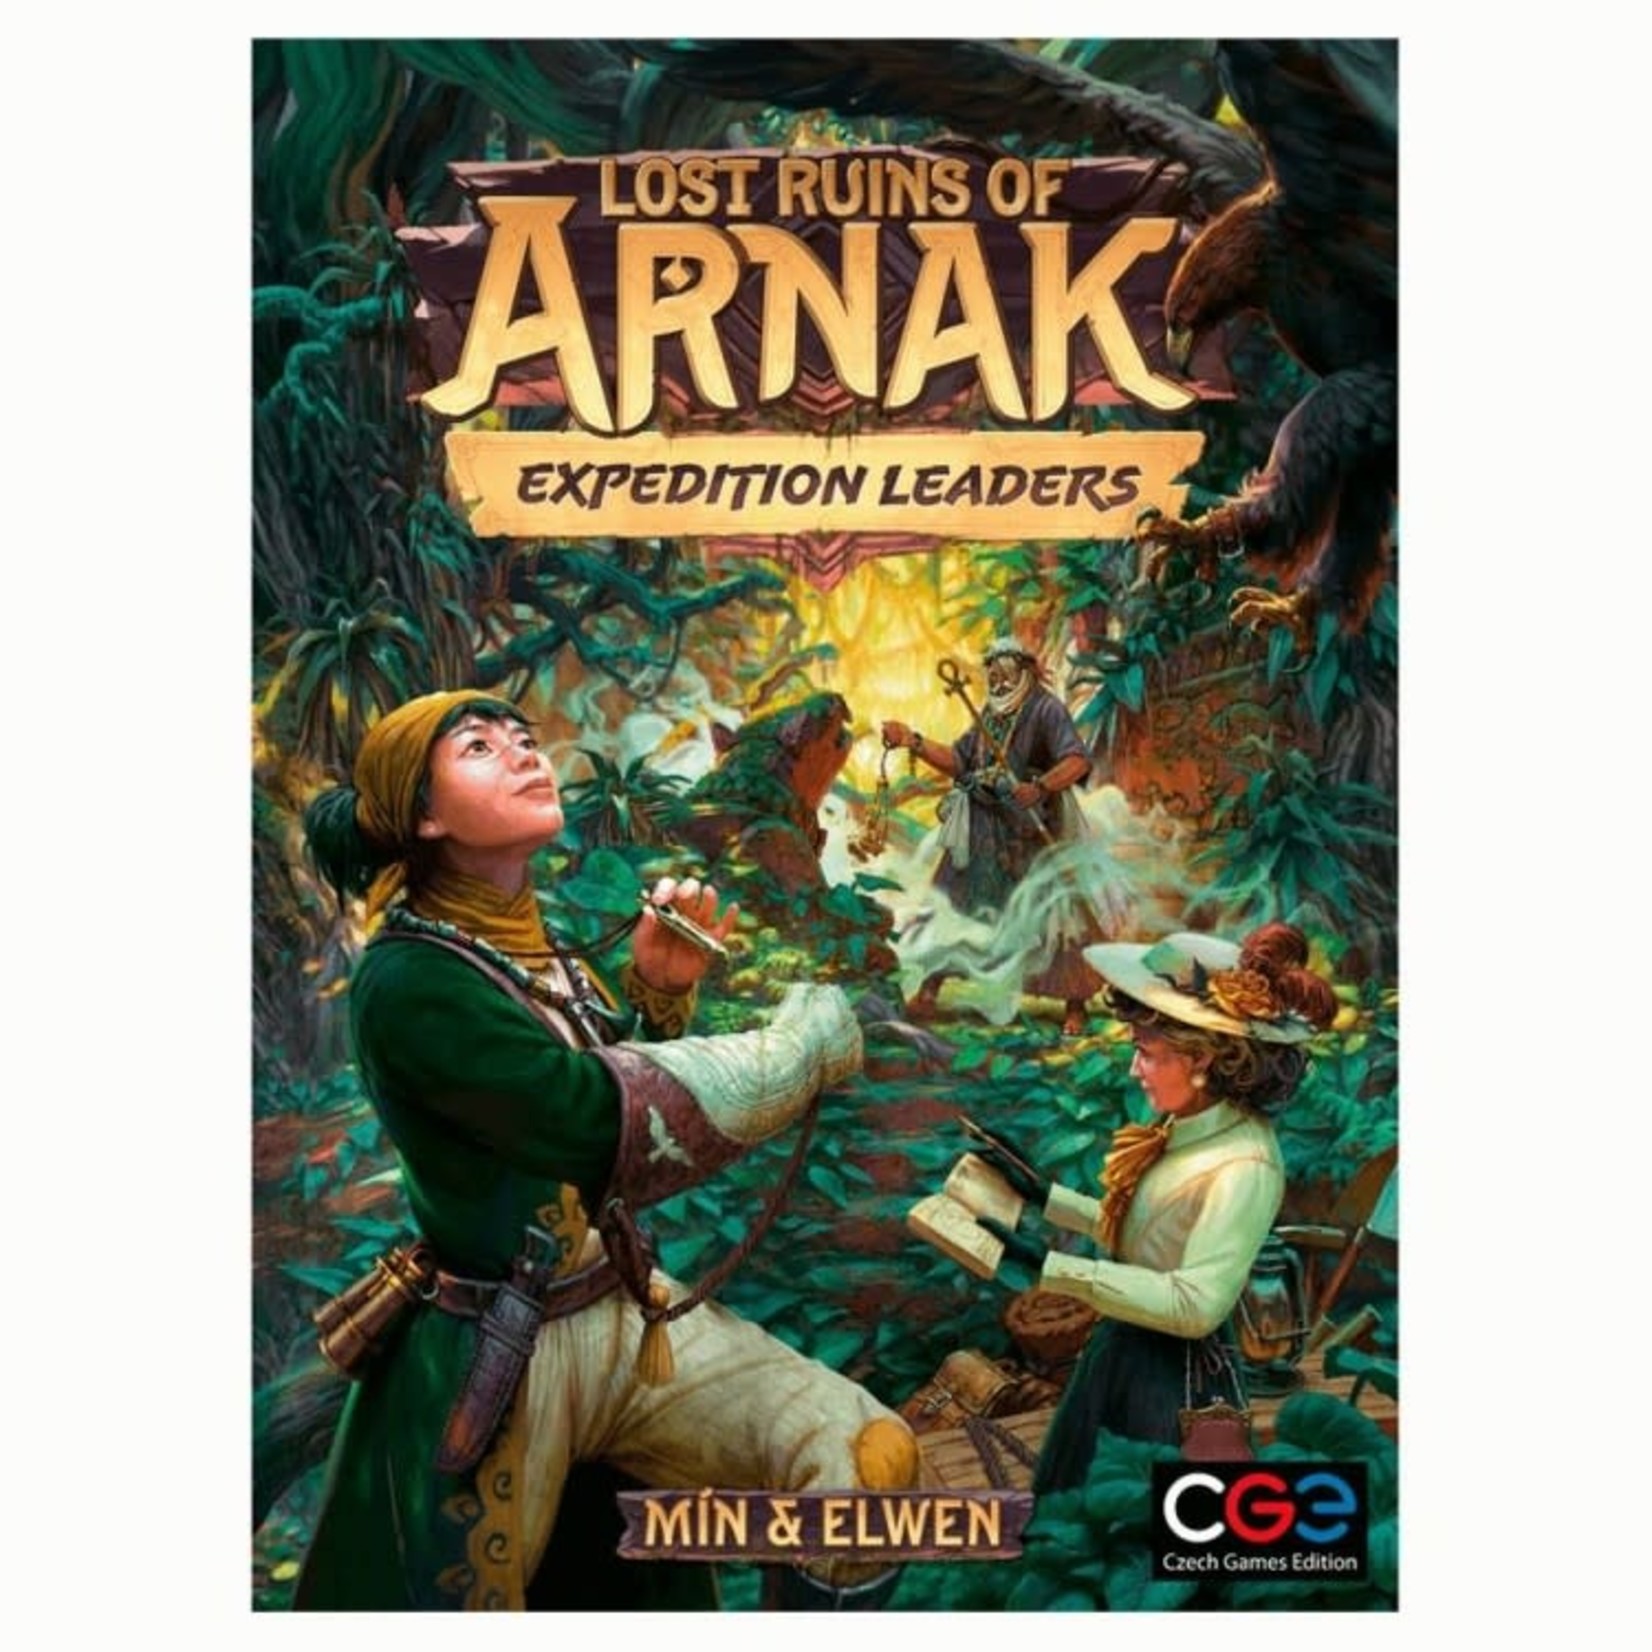 Czech Games Editions Lost Ruins of Arnak Expedition Leaders